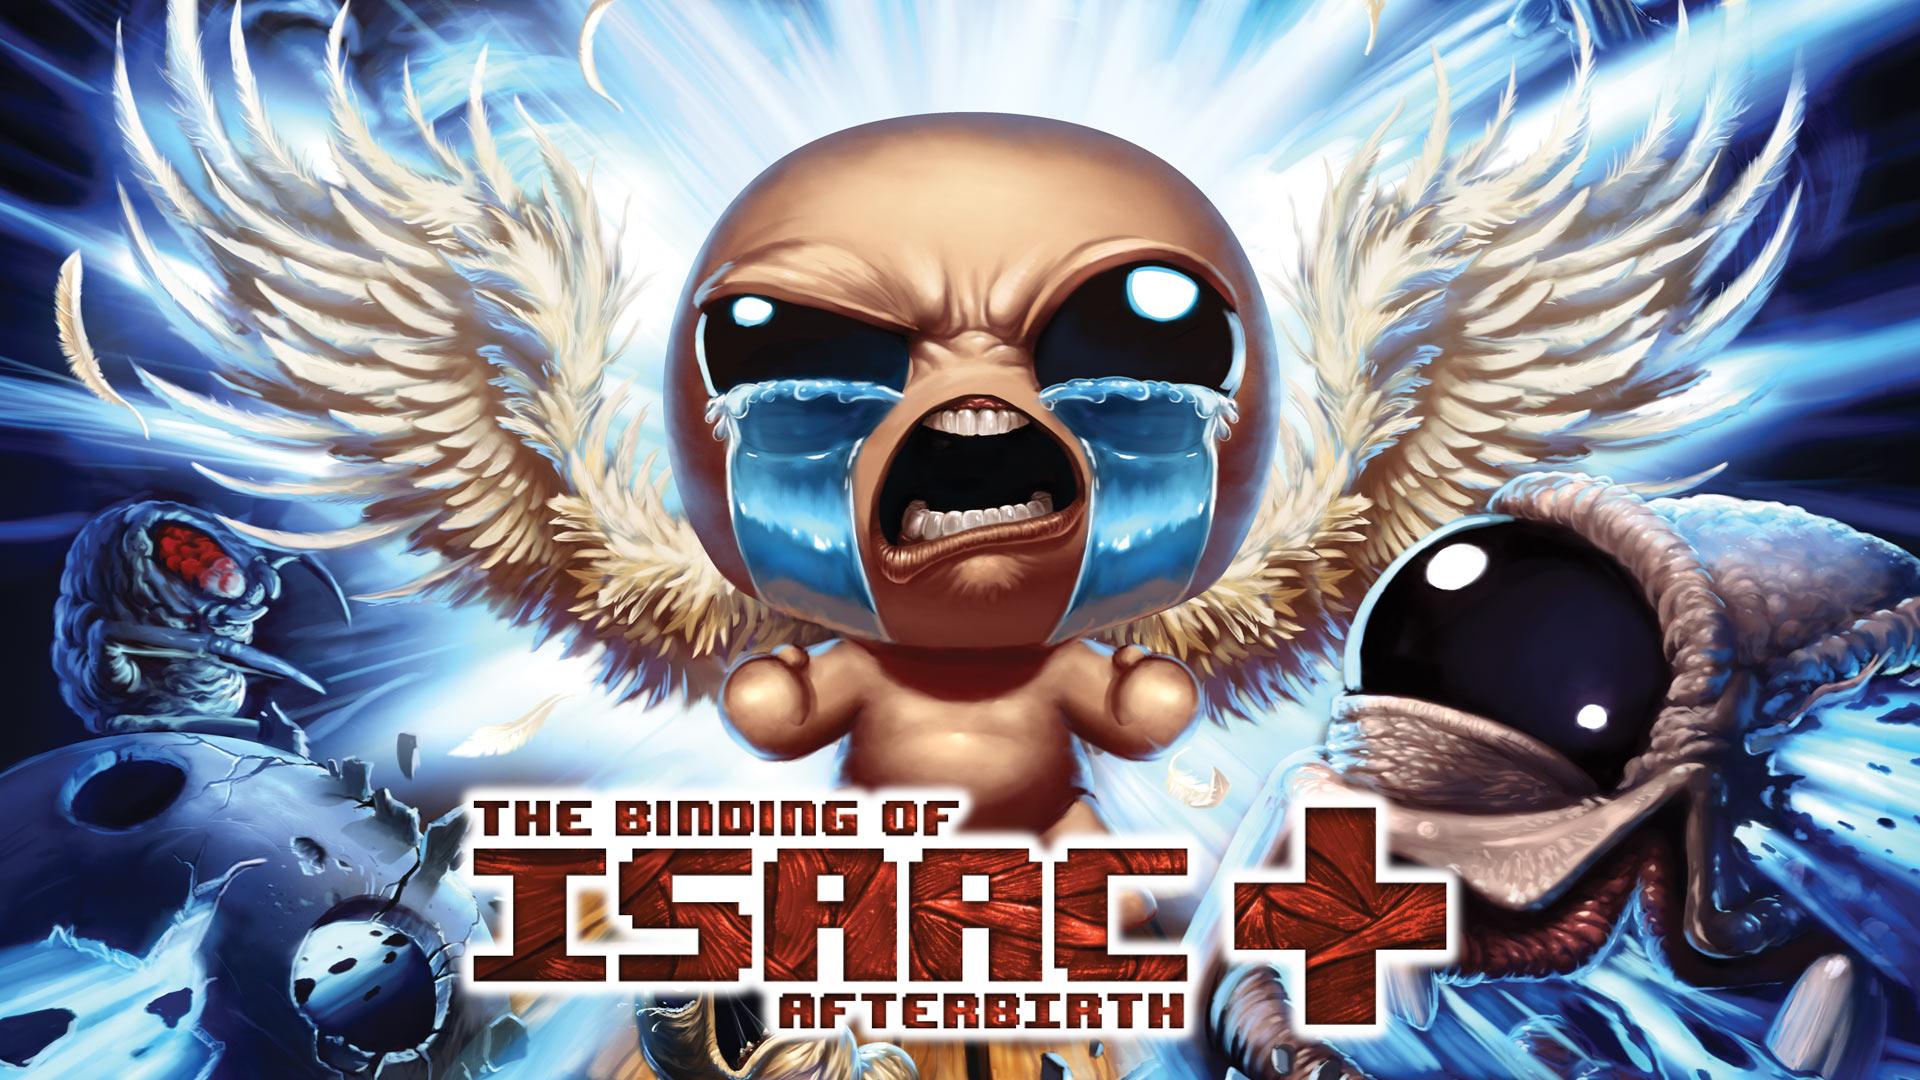 The Binding of Isaac Afterbirth + Nintendo Switch Video Game Original